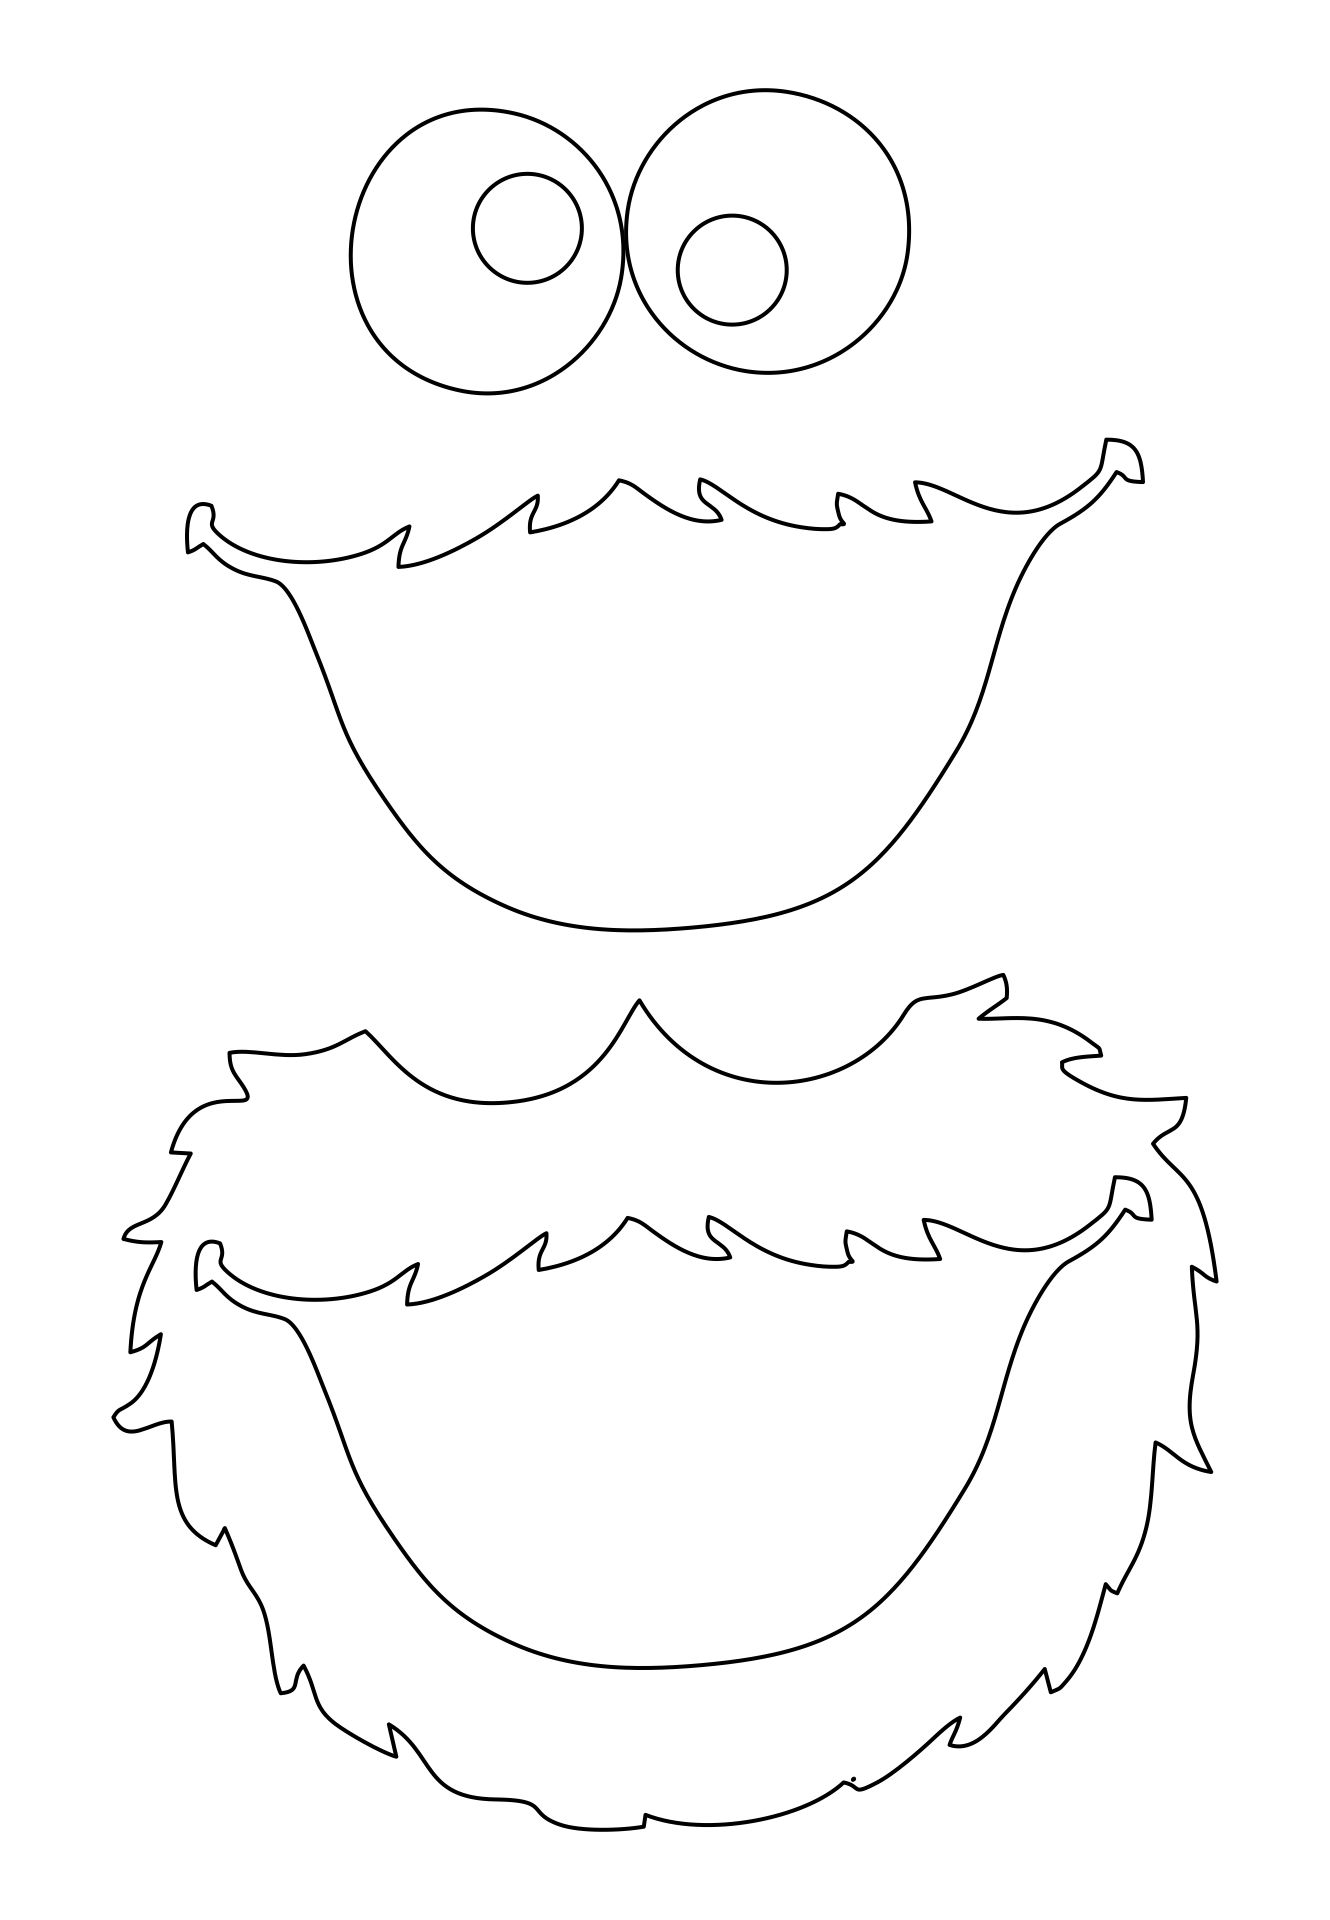 6 Best Images of Cookie Monster Face Template Printable - Cookie ...